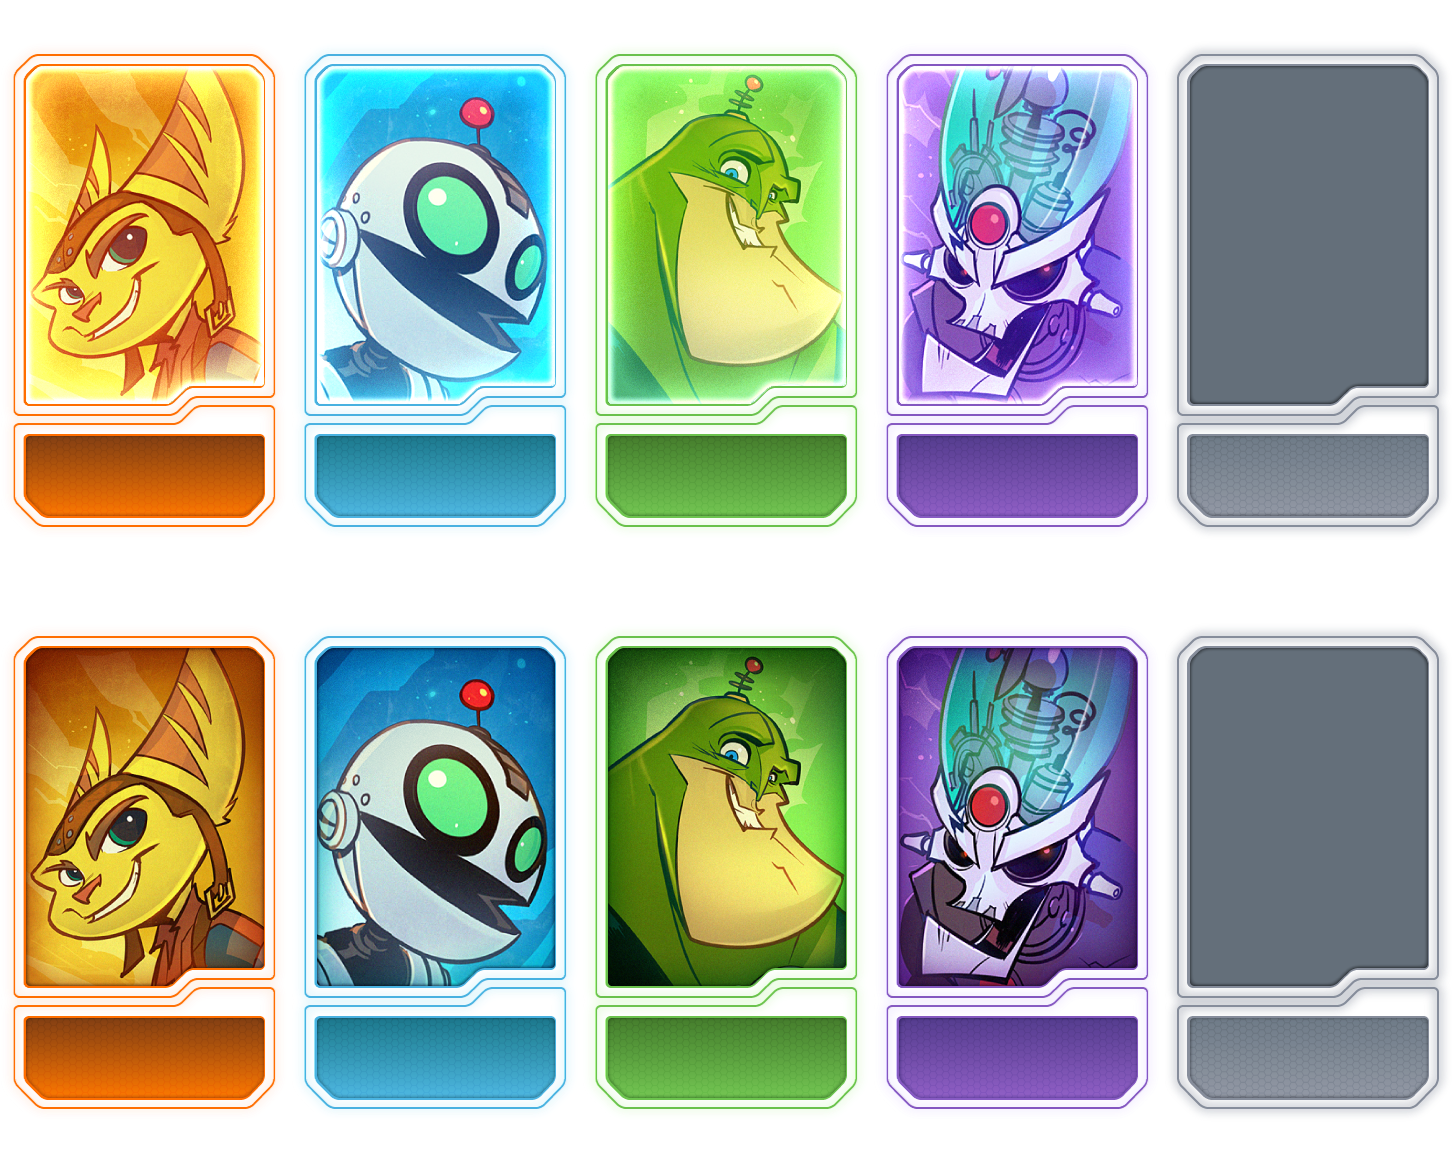 Ratchet & Clank: All 4 One - Old Character Cards